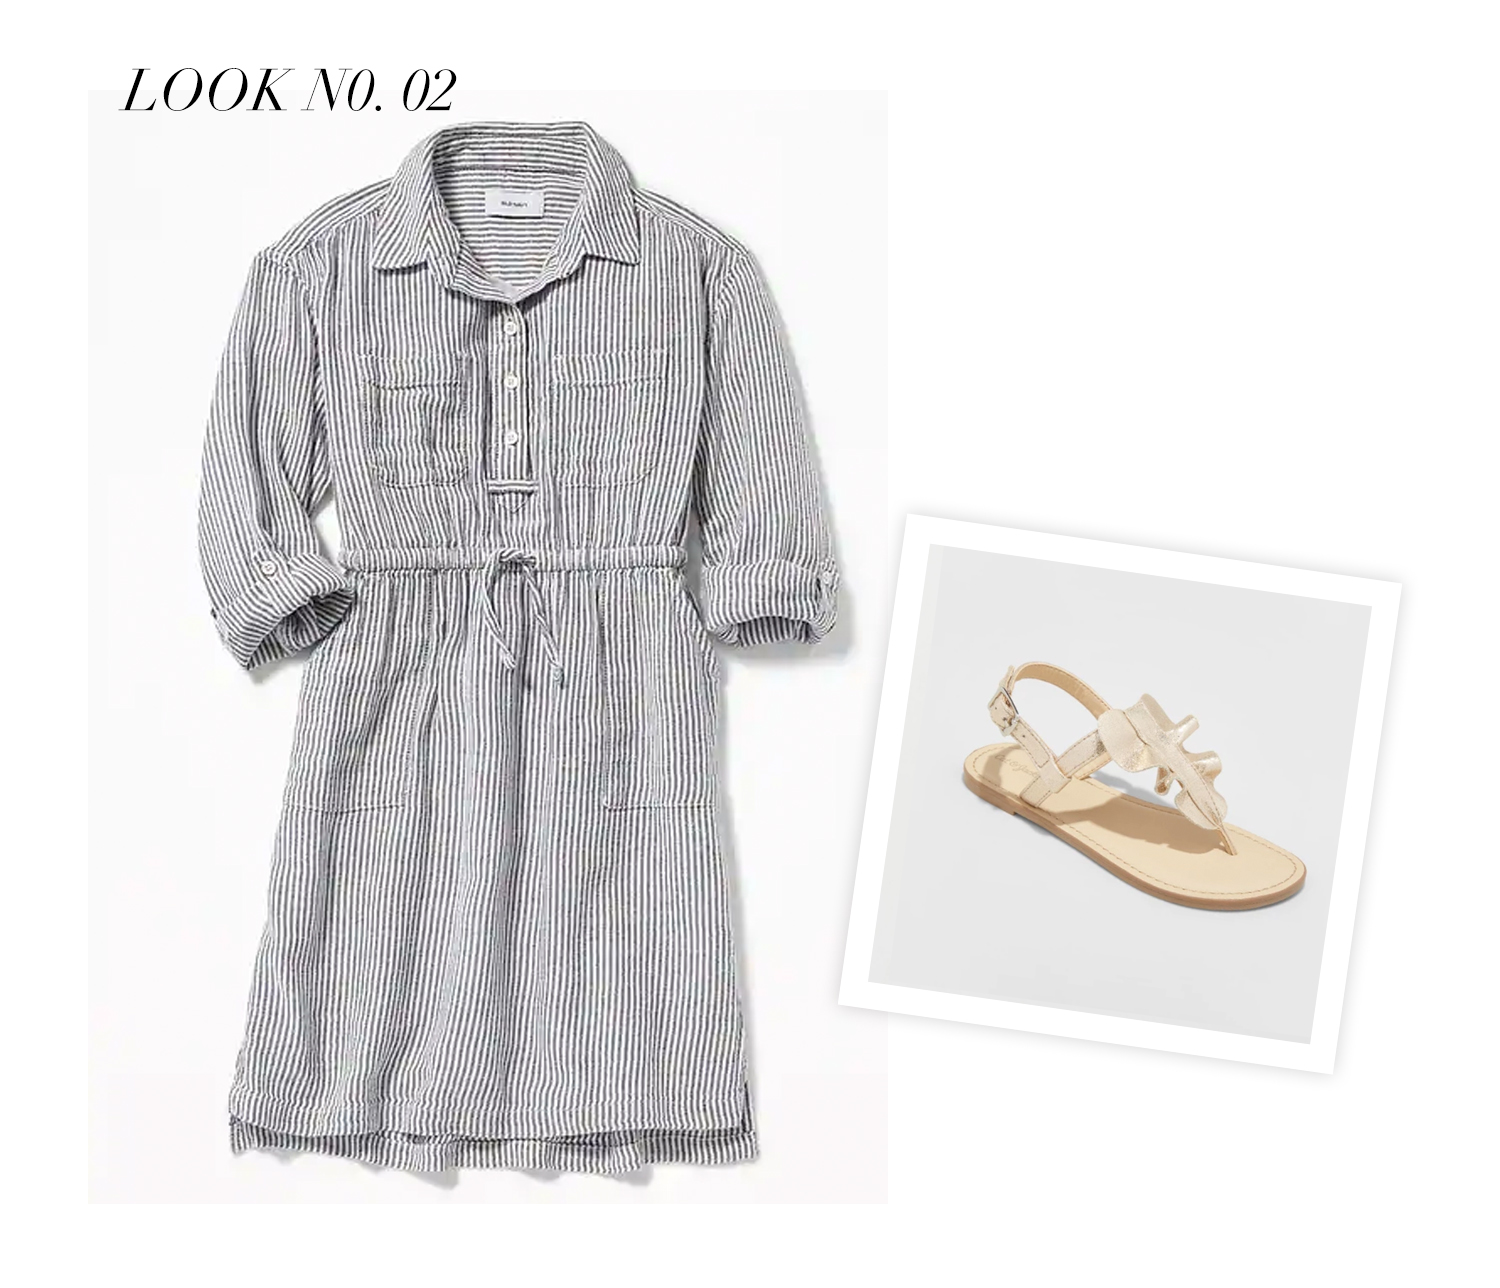 My five favorite Easter Sunday styles for Mom and daughter. Some items are currently on sale and all are local stores so you can find what you need. Catch them all over on Haus of Layne! #EasterSunday #SpringFashion #SpringStyle #EasterOutfitIdea #EasterSundayOutfit 